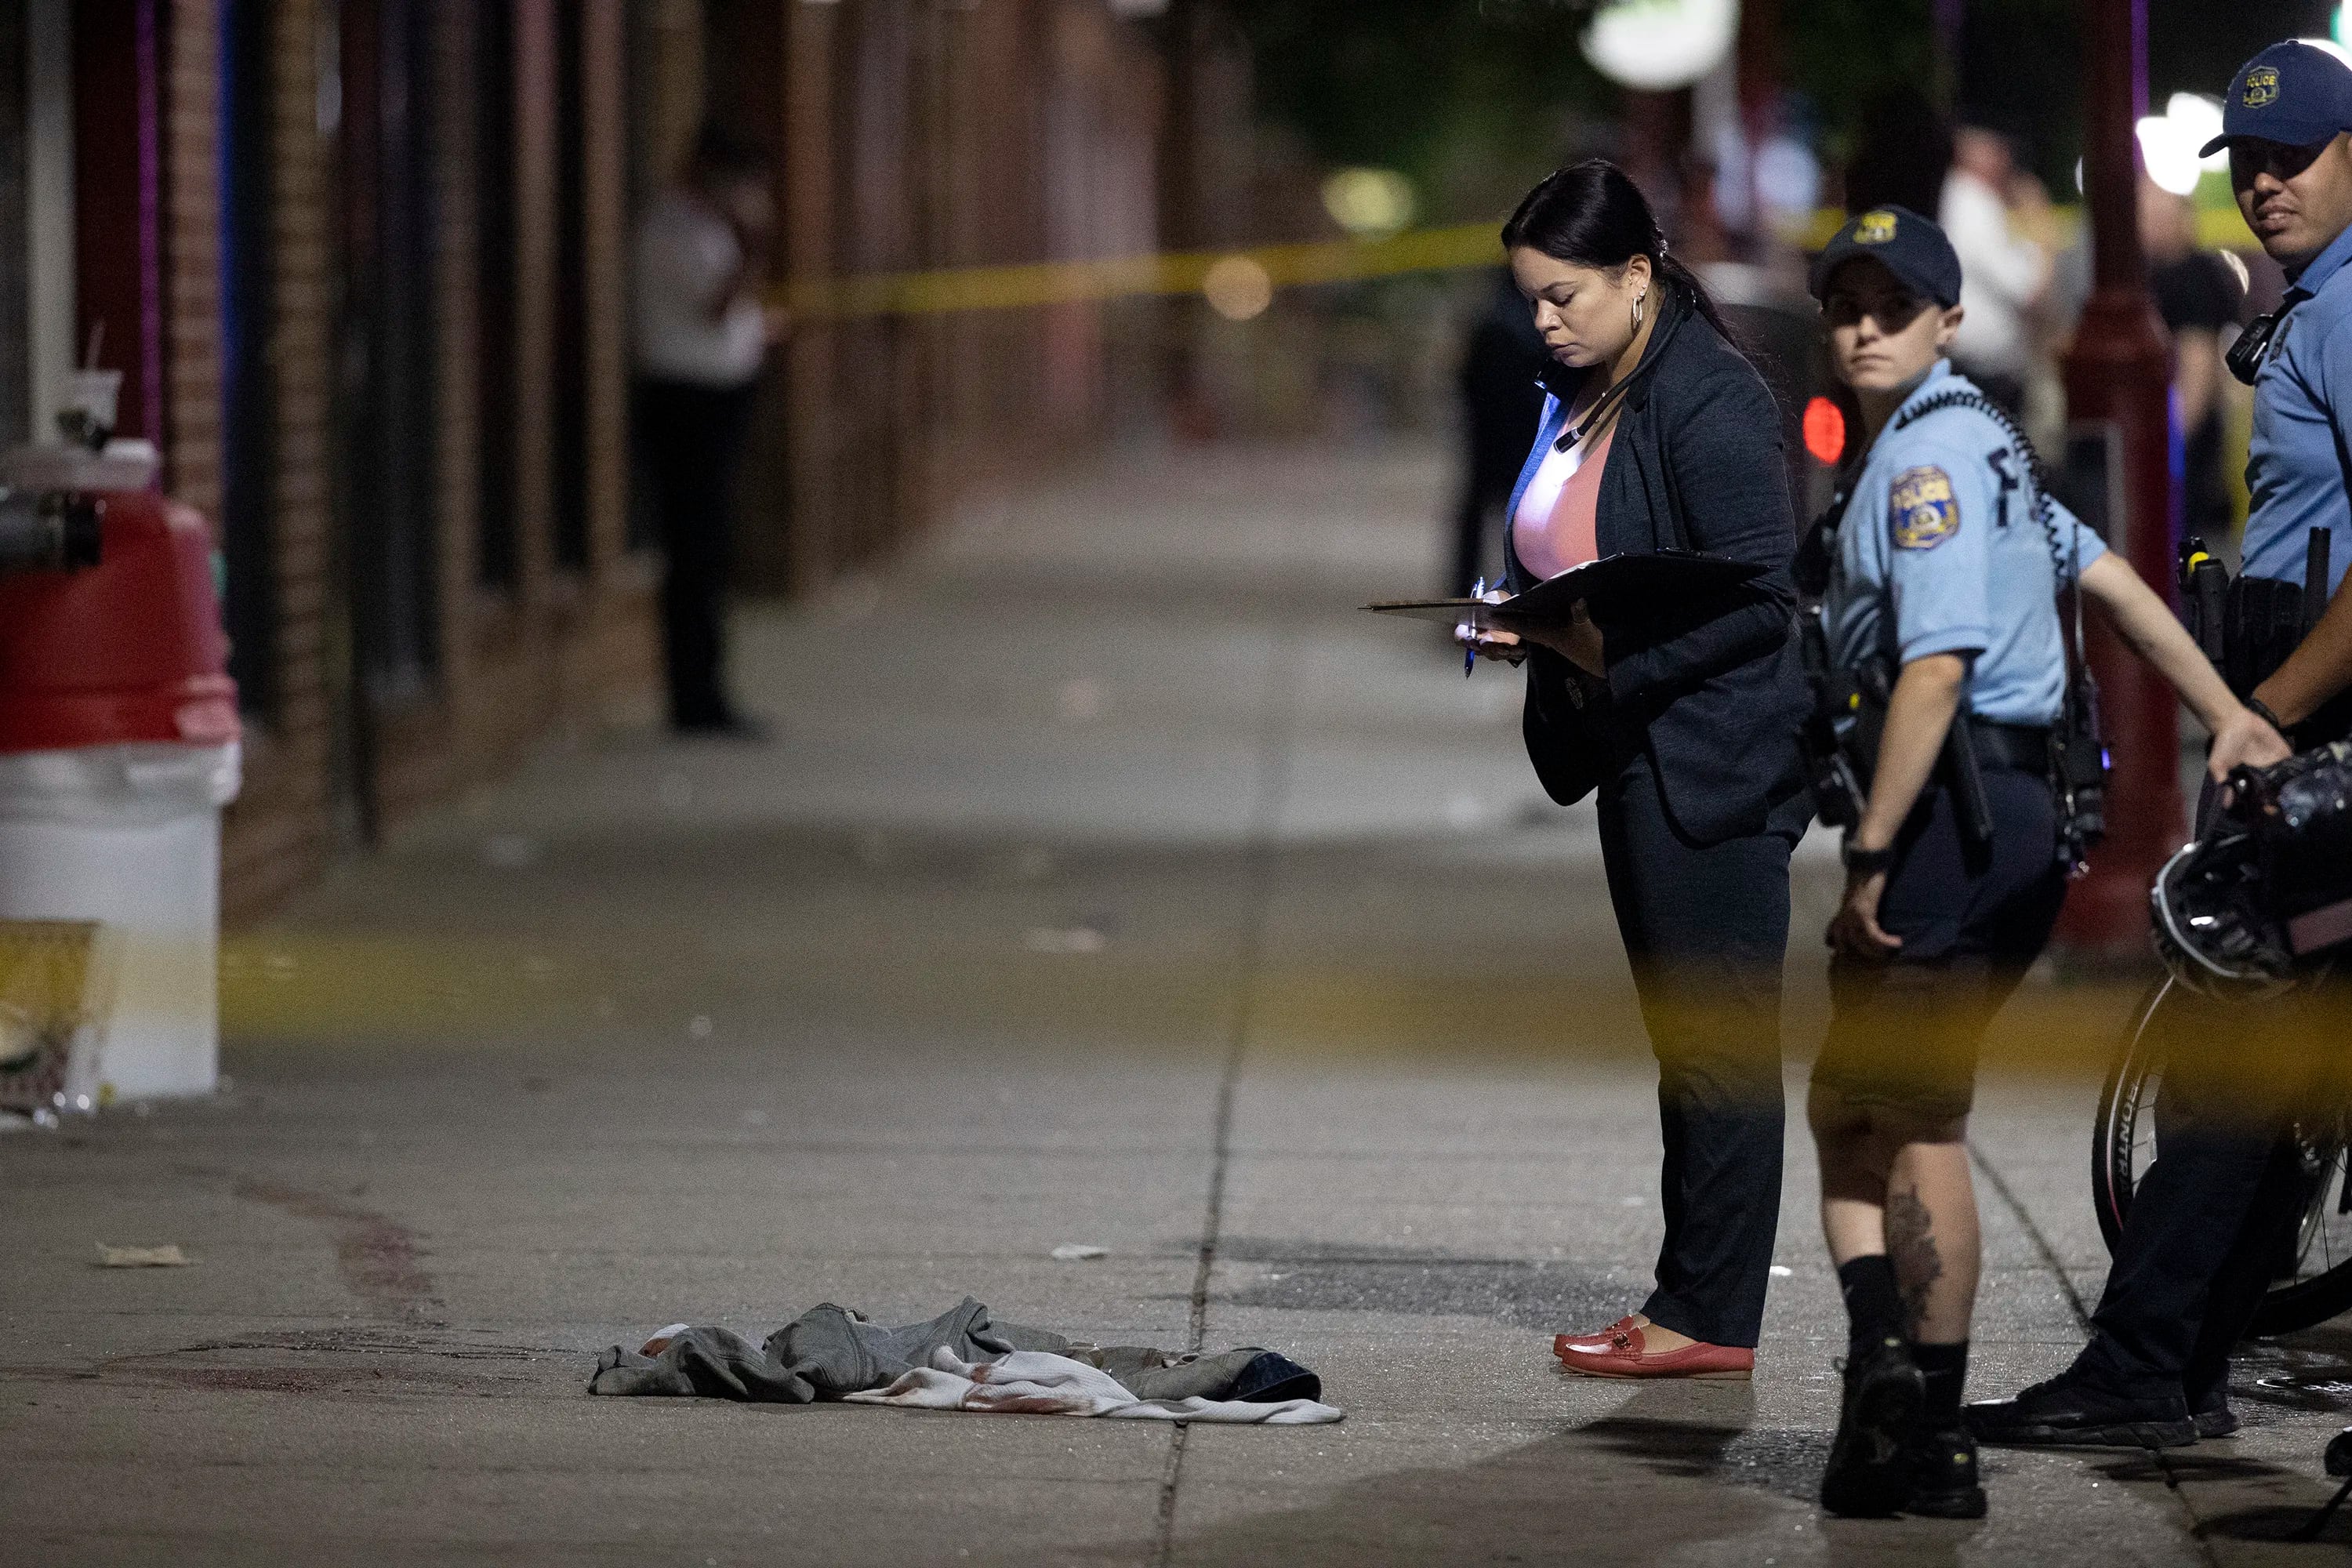 Philadelphia Police officers and detectives look over evidence at the scene of a shooting on and near South Street that left 3 dead and 11 wounded.